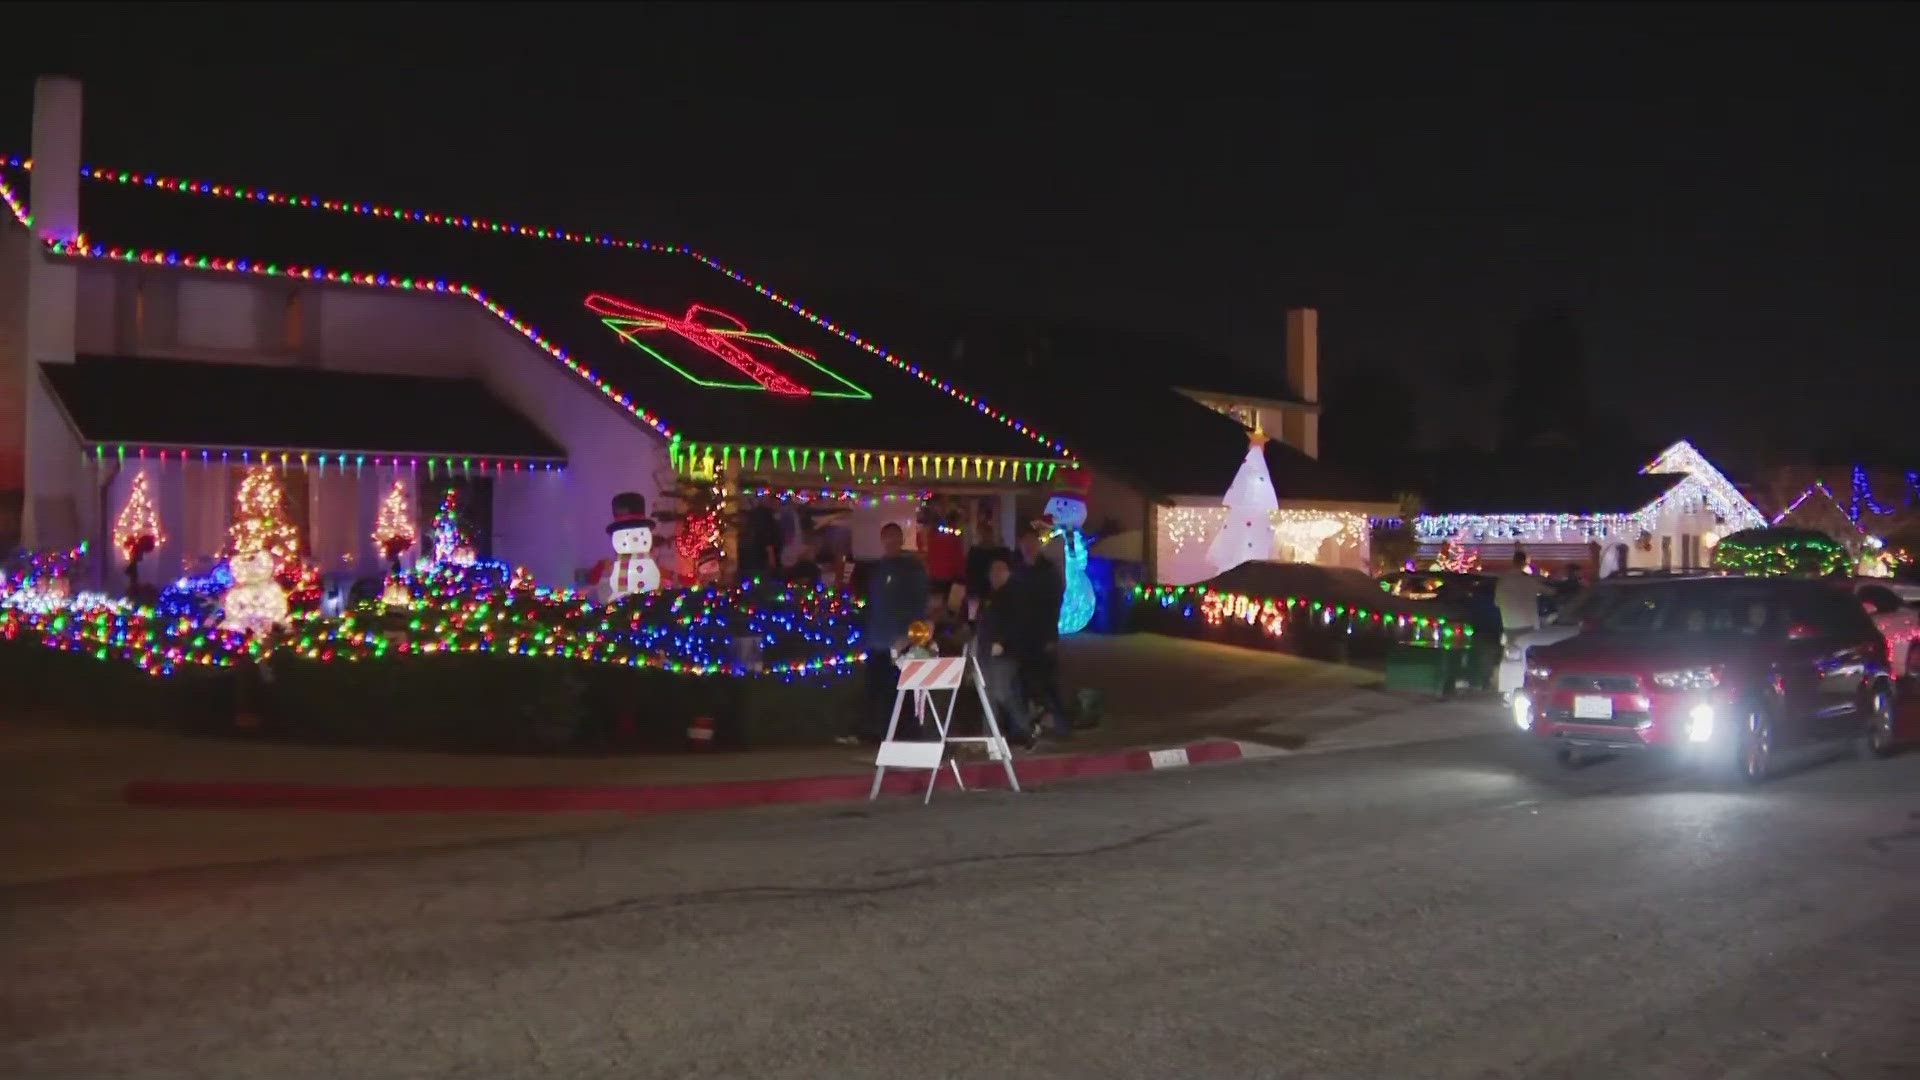 CBS 8's Rocio De La Fe visited Clairemont for some fun holiday festivities in this San Diego neighborhood on Lana Drive and Jamar Drive.